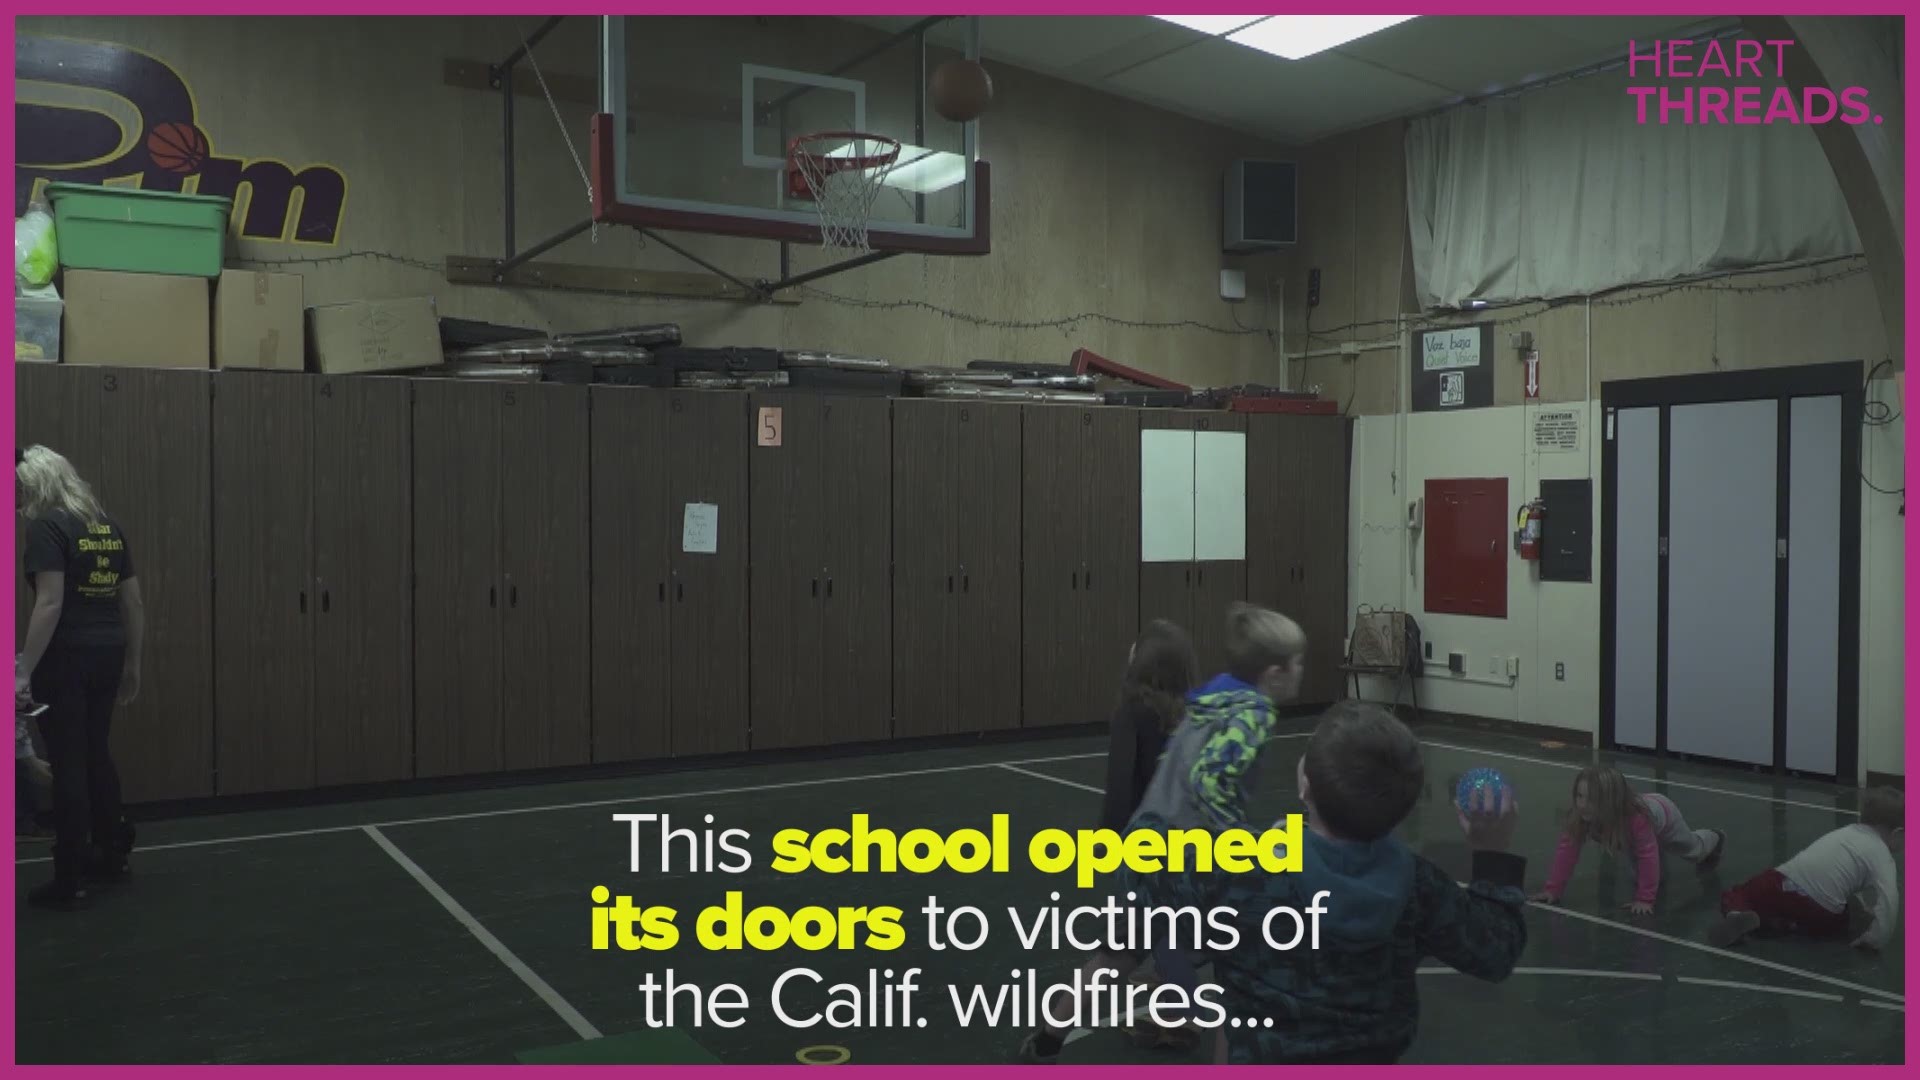 Kids from Chico Unified School District and Paradise got time to reconnect, and for many parents, it was the first chance to tell their children what was happening.